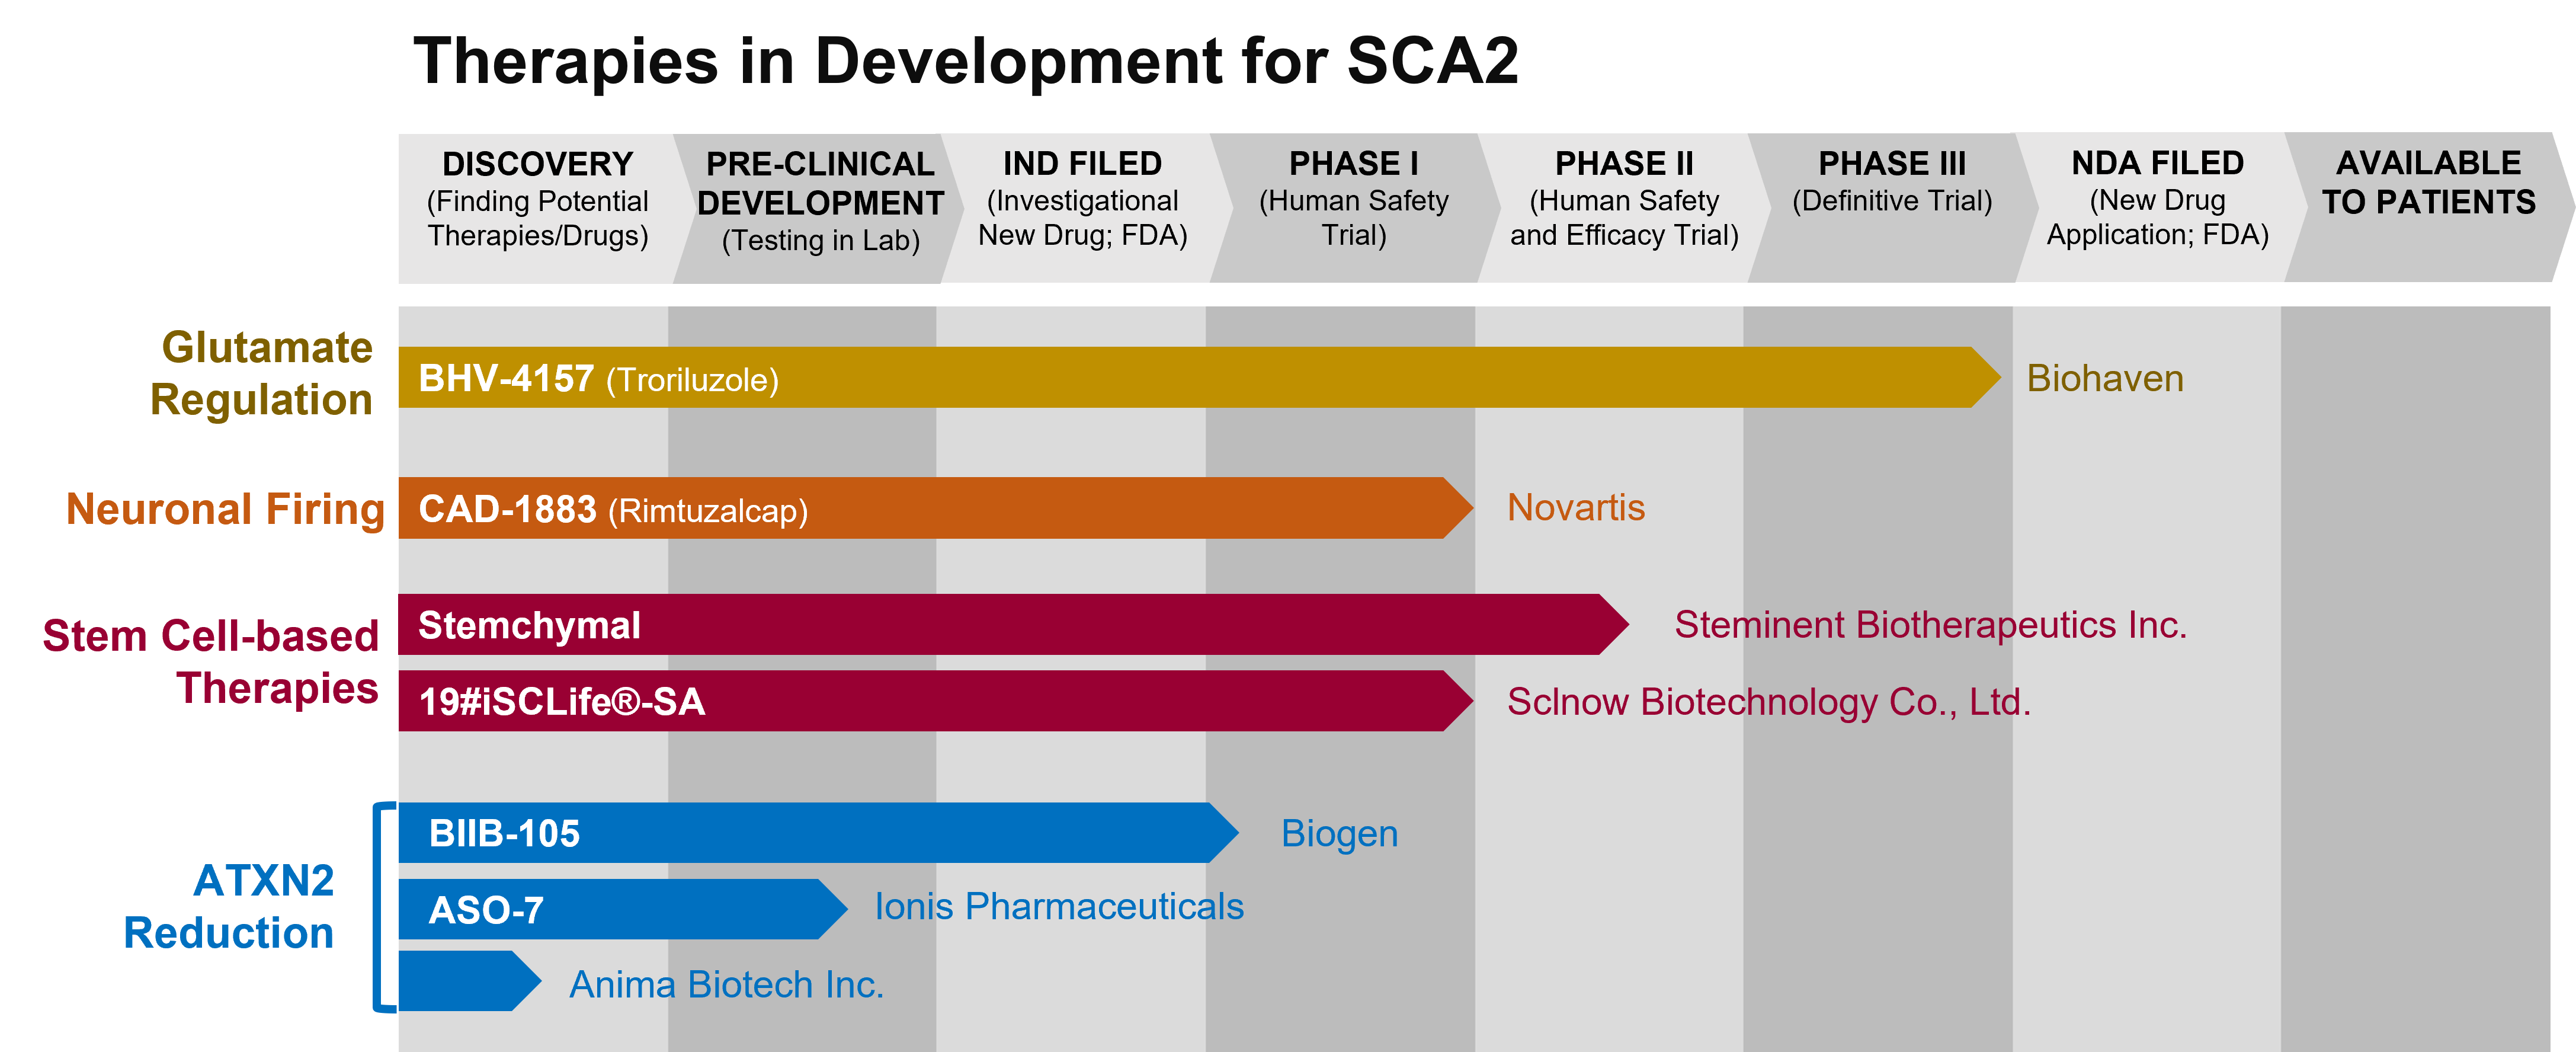 Graph depicting the phase of drug development for various drugs to treat SCA2